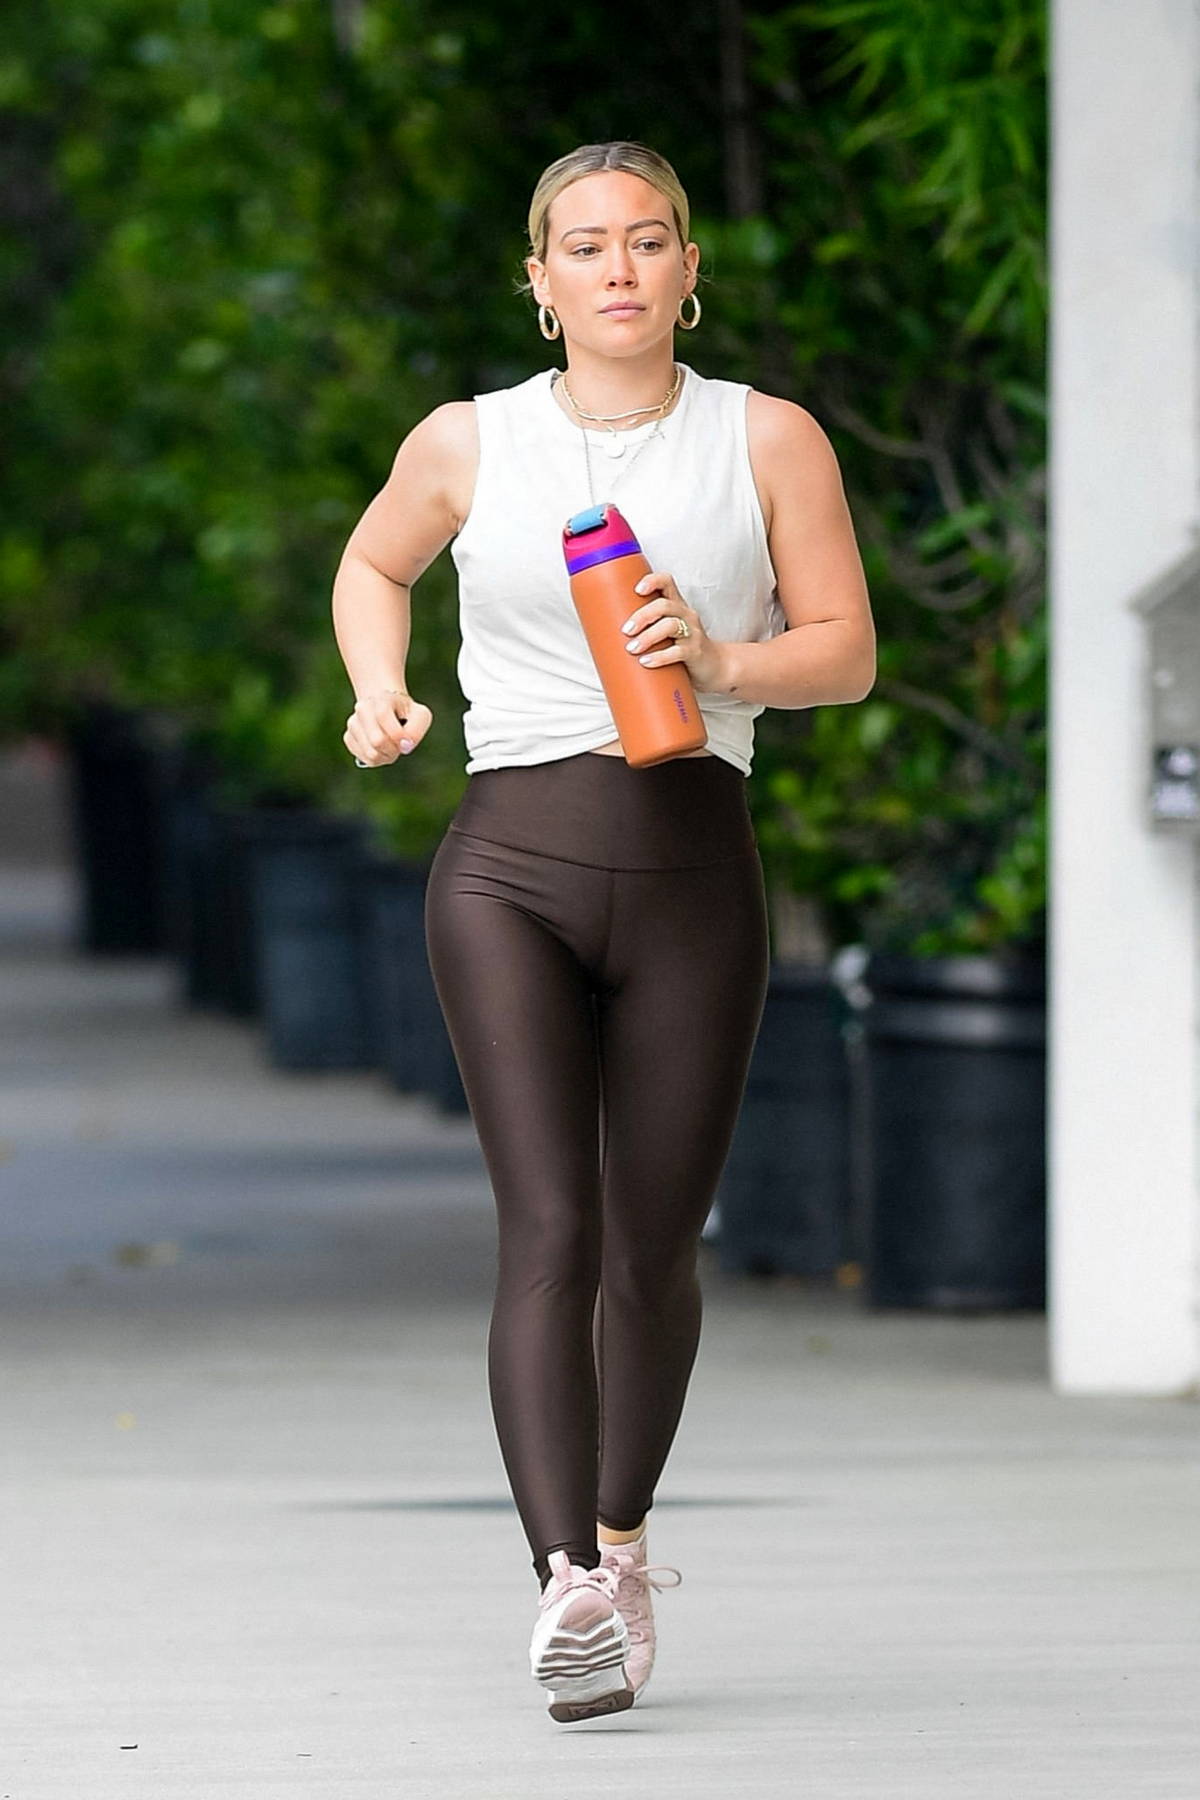 Hilary Duff looks fit in a white tank top and dark brown leggings